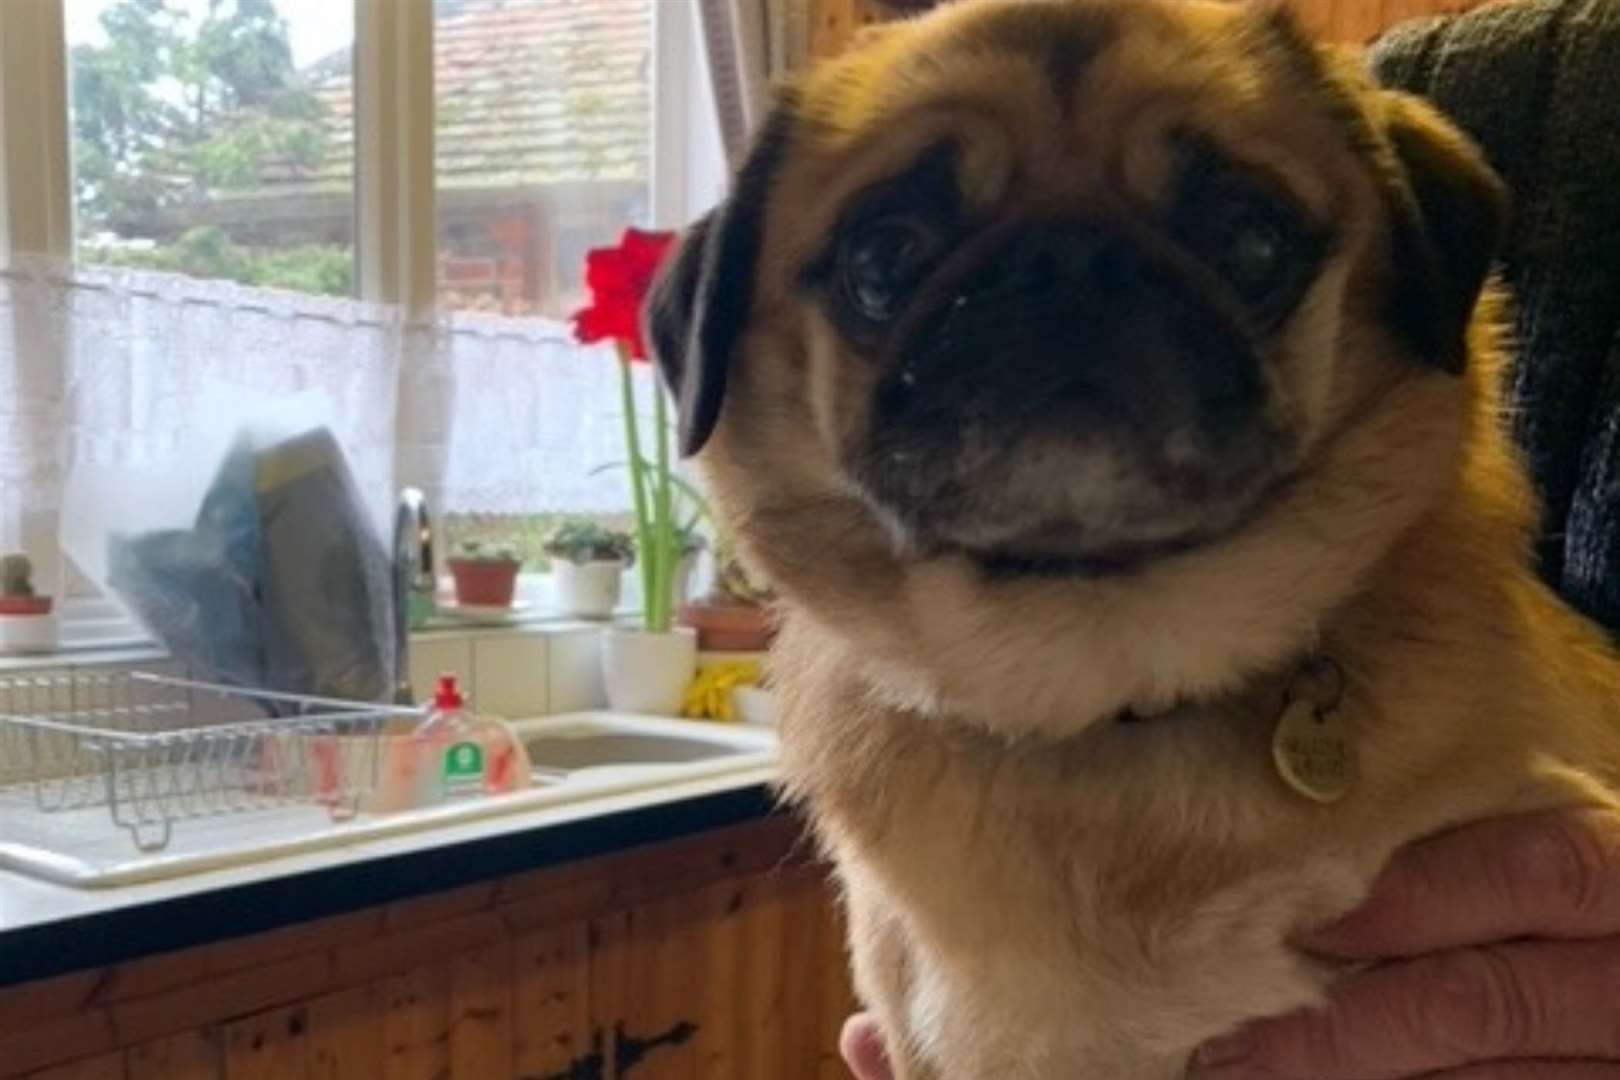 Tom the pug was sadly found dead. Picture is his brother, who he looks like in appearance. Photo: Emily Buckley